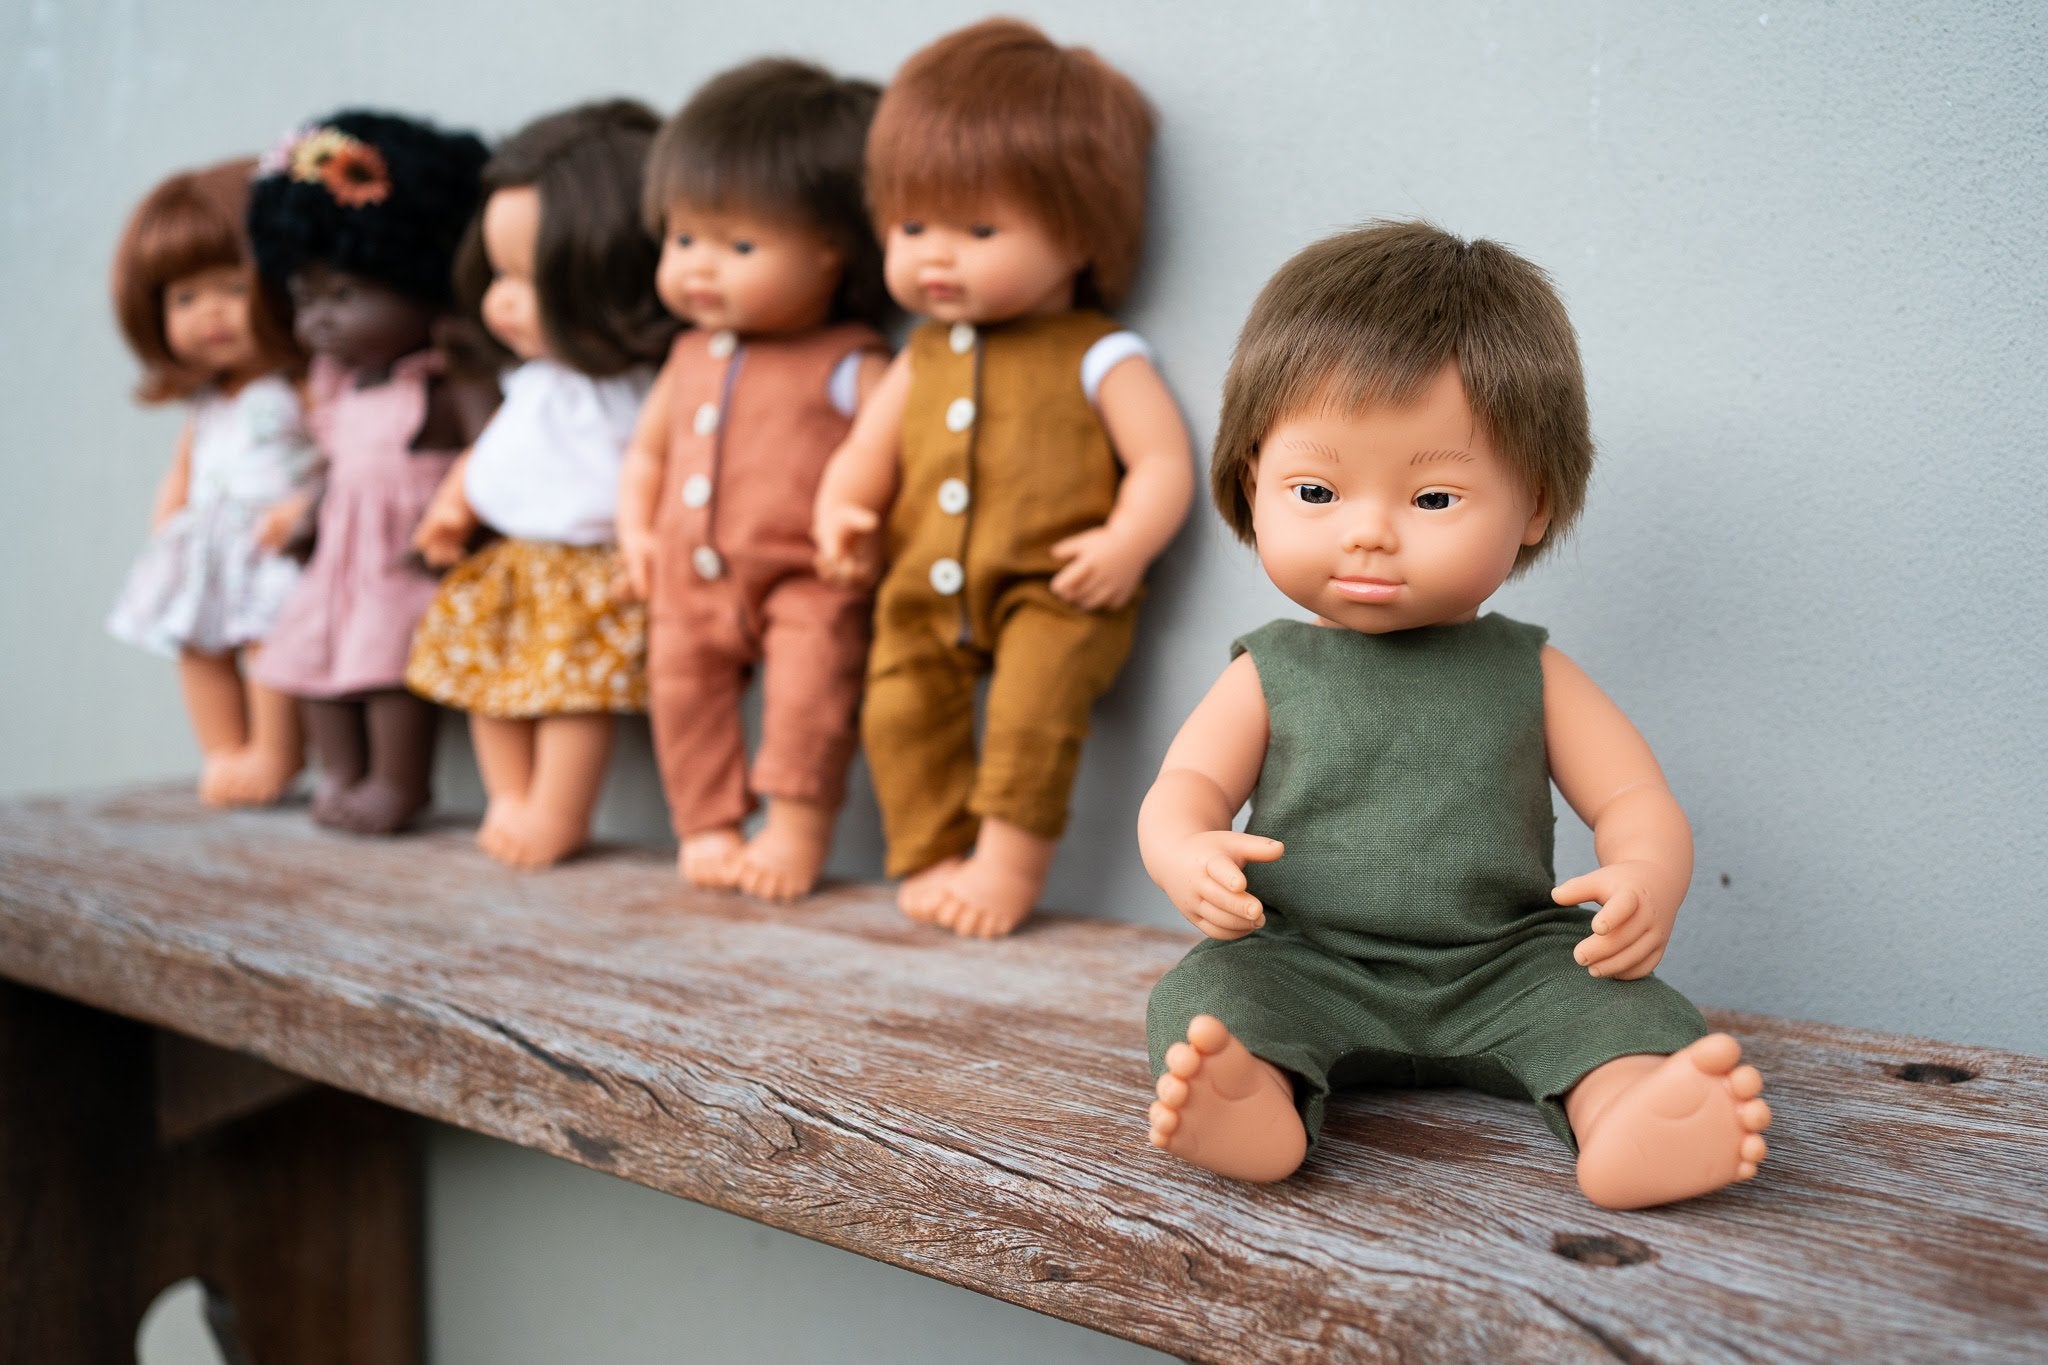 Miniland Caucasian Baby Doll Boy with Down Syndrome